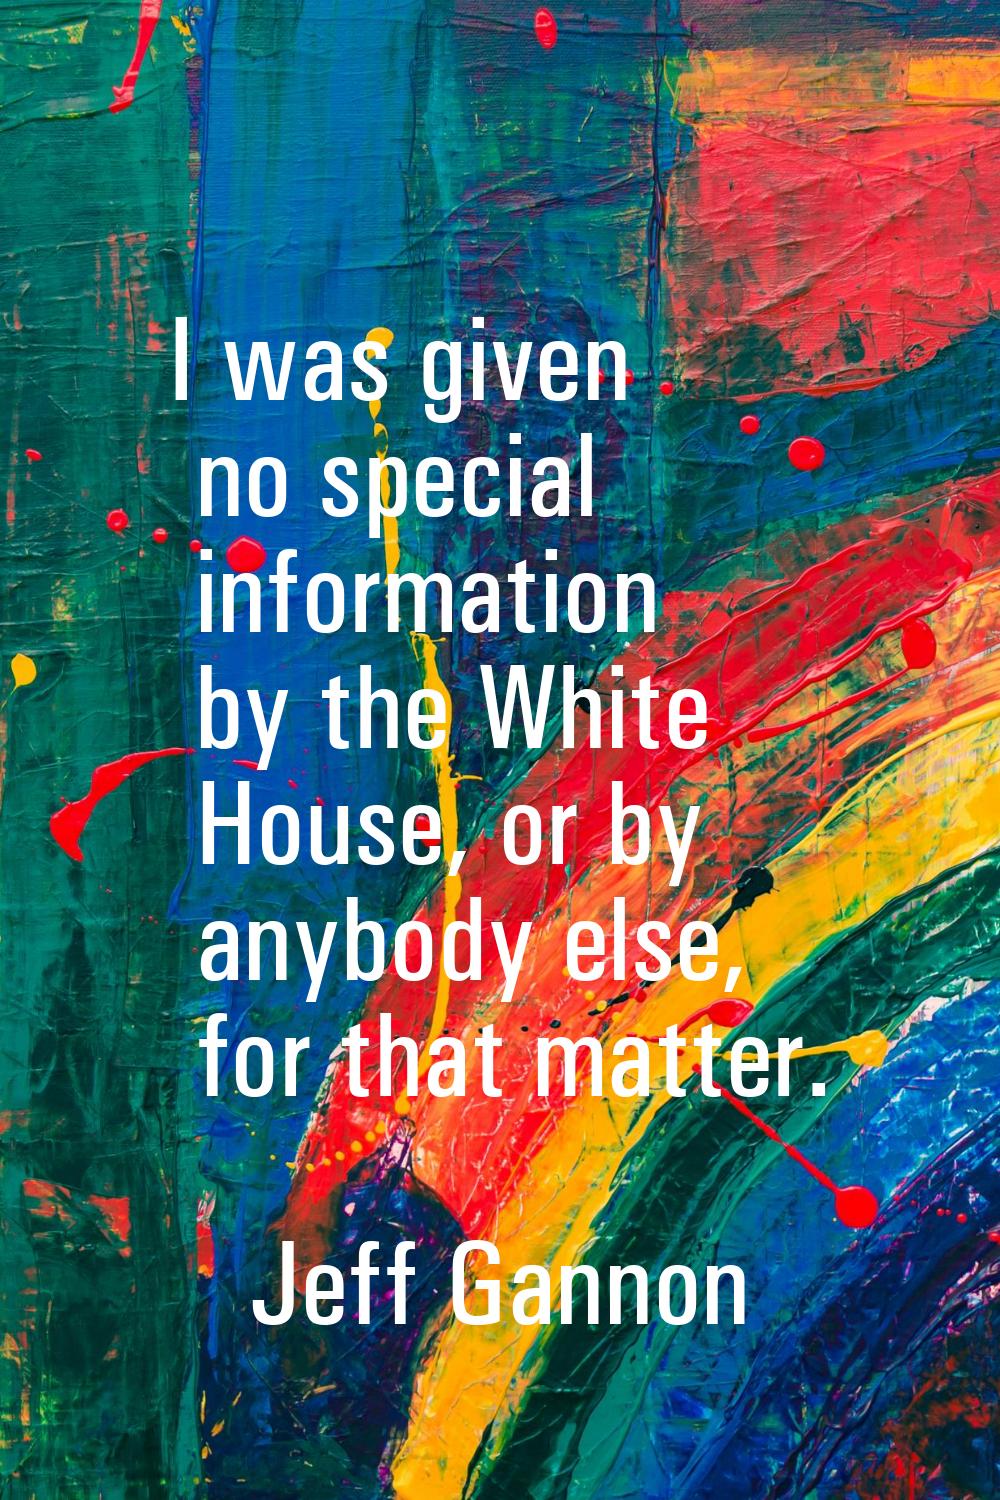 I was given no special information by the White House, or by anybody else, for that matter.